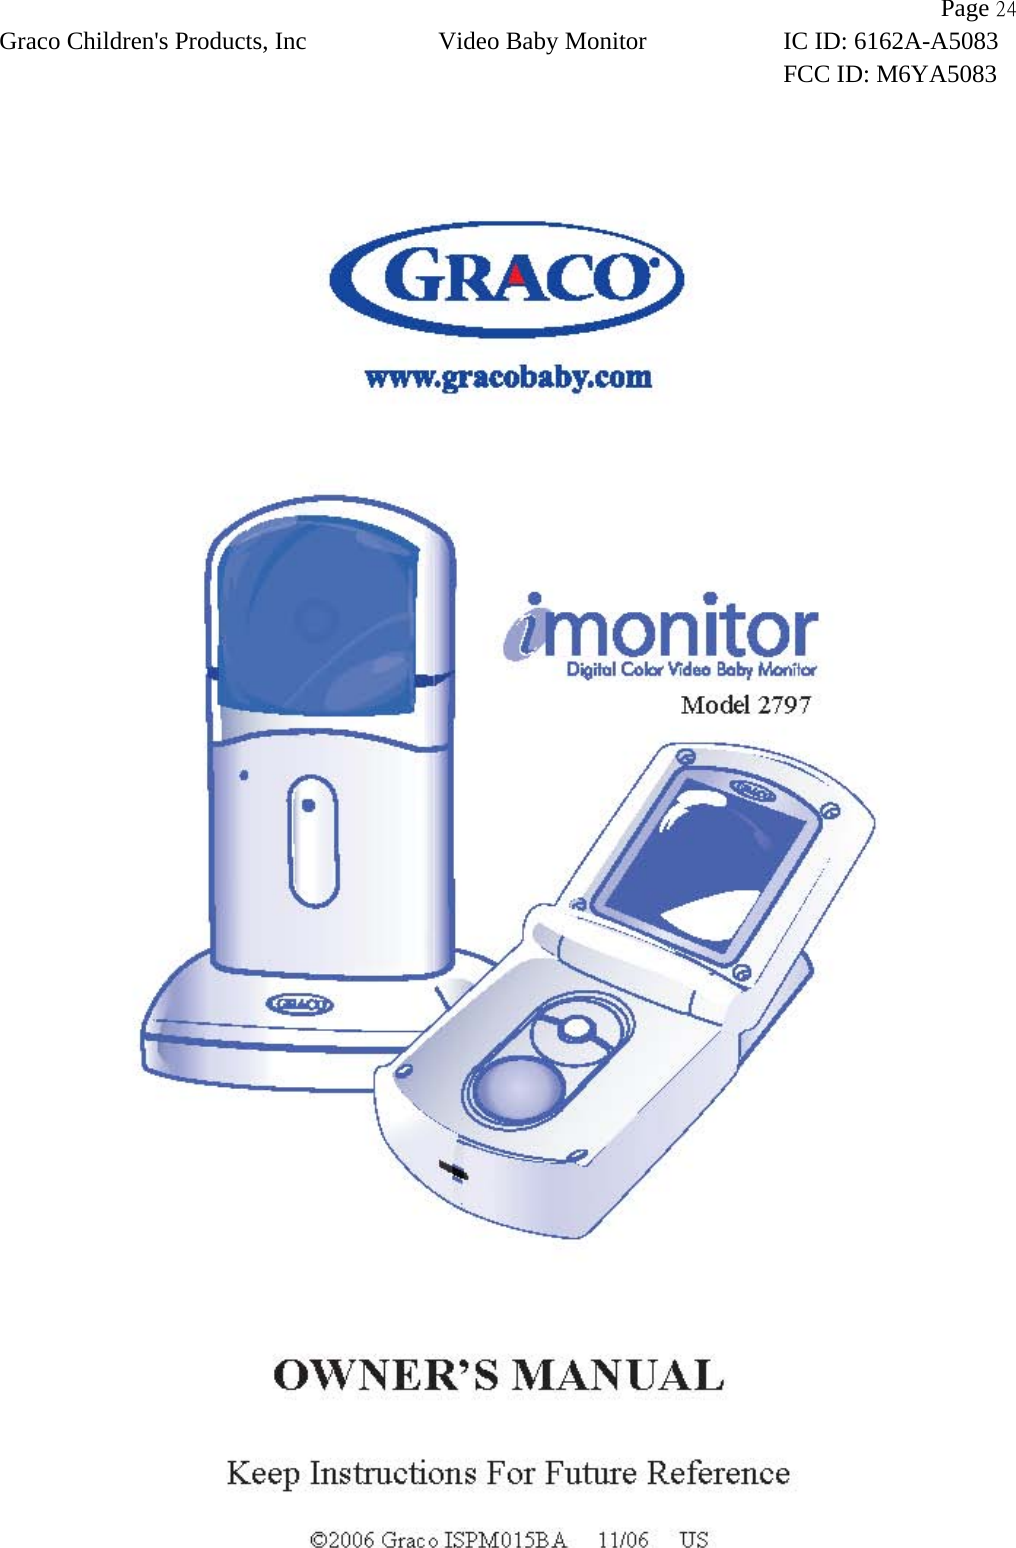                Page 24 Graco Children&apos;s Products, Inc Video Baby Monitor IC ID: 6162A-A5083 FCC ID: M6YA5083    